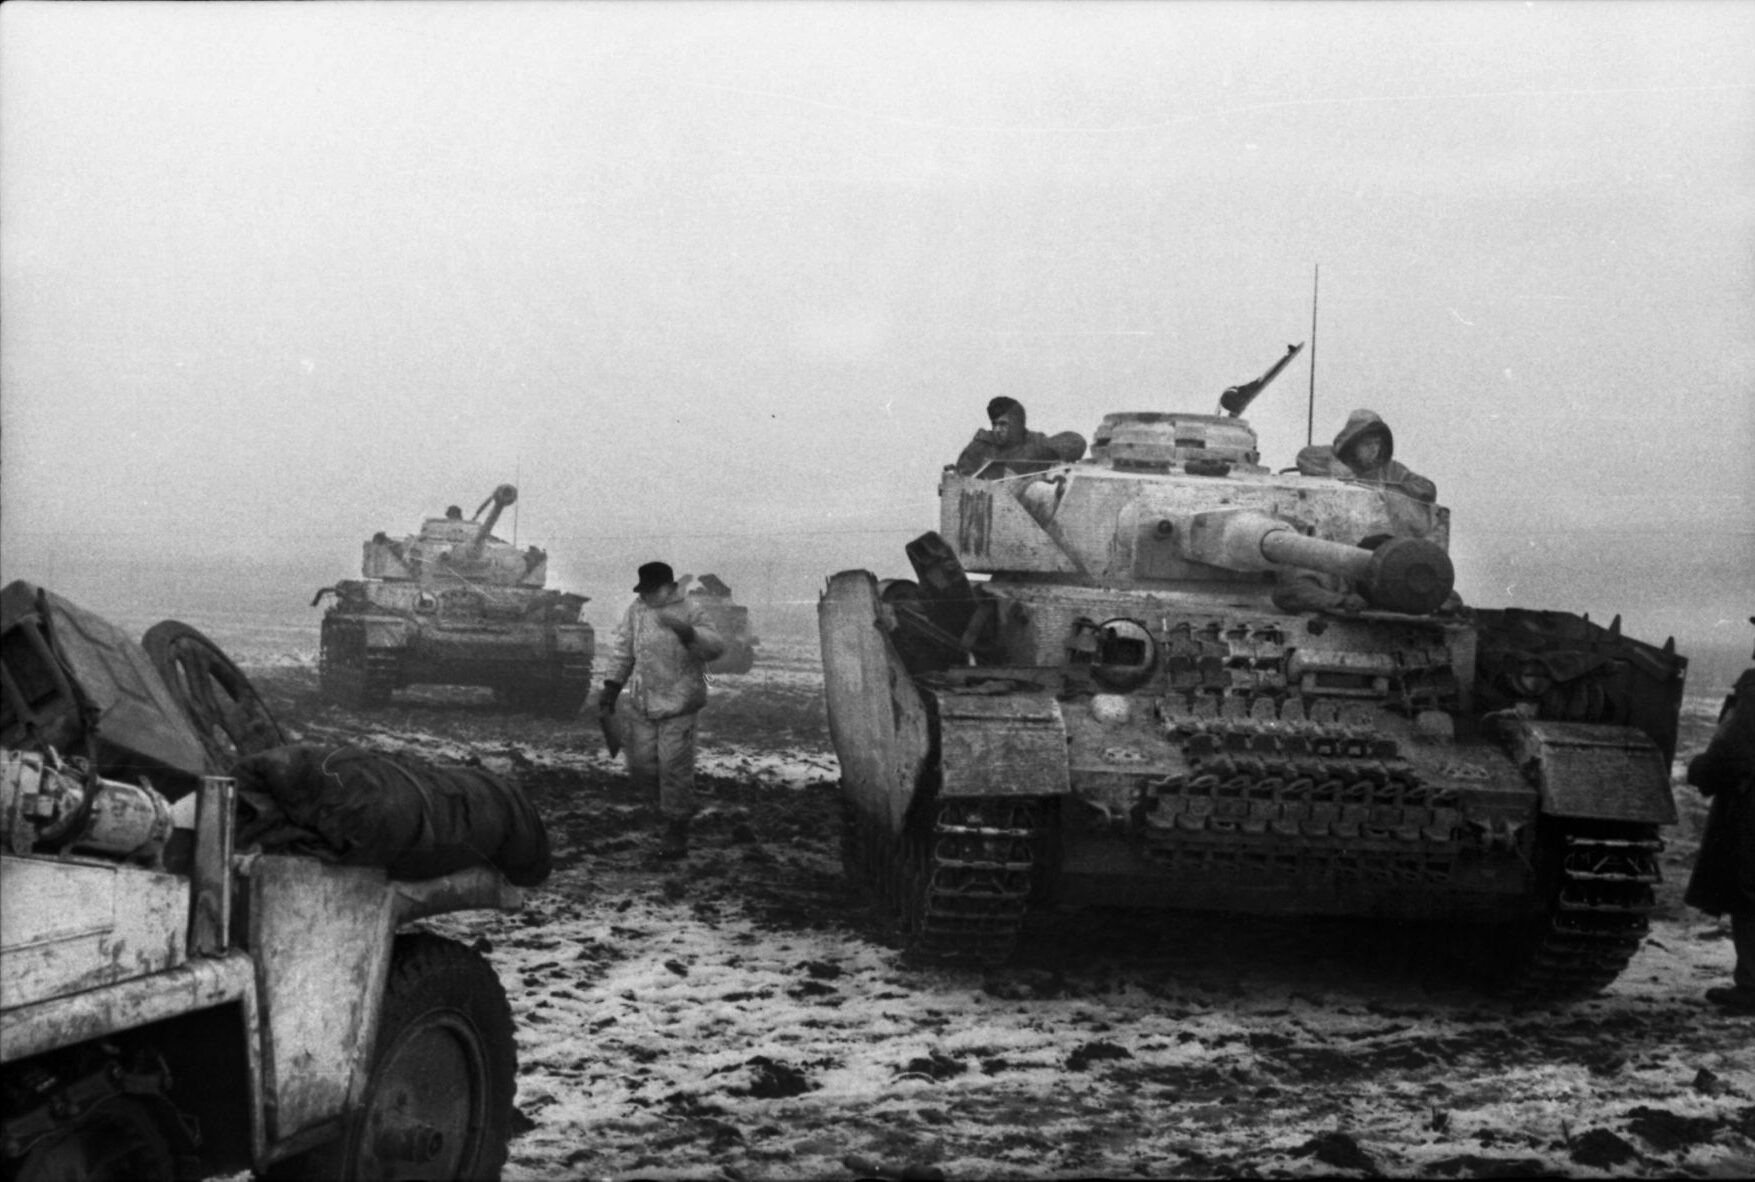 Two German PzKpfw. IV tanks advance along a bleak, muddy landscape in December 1943, as panzergrenadiers trudge down a Ukrainian road that has turned into a quagmire or hitch rides on the tanks. Note the side armor on the vehicles, intended to detonate antitank shells prior to impact with the tank’s hull.